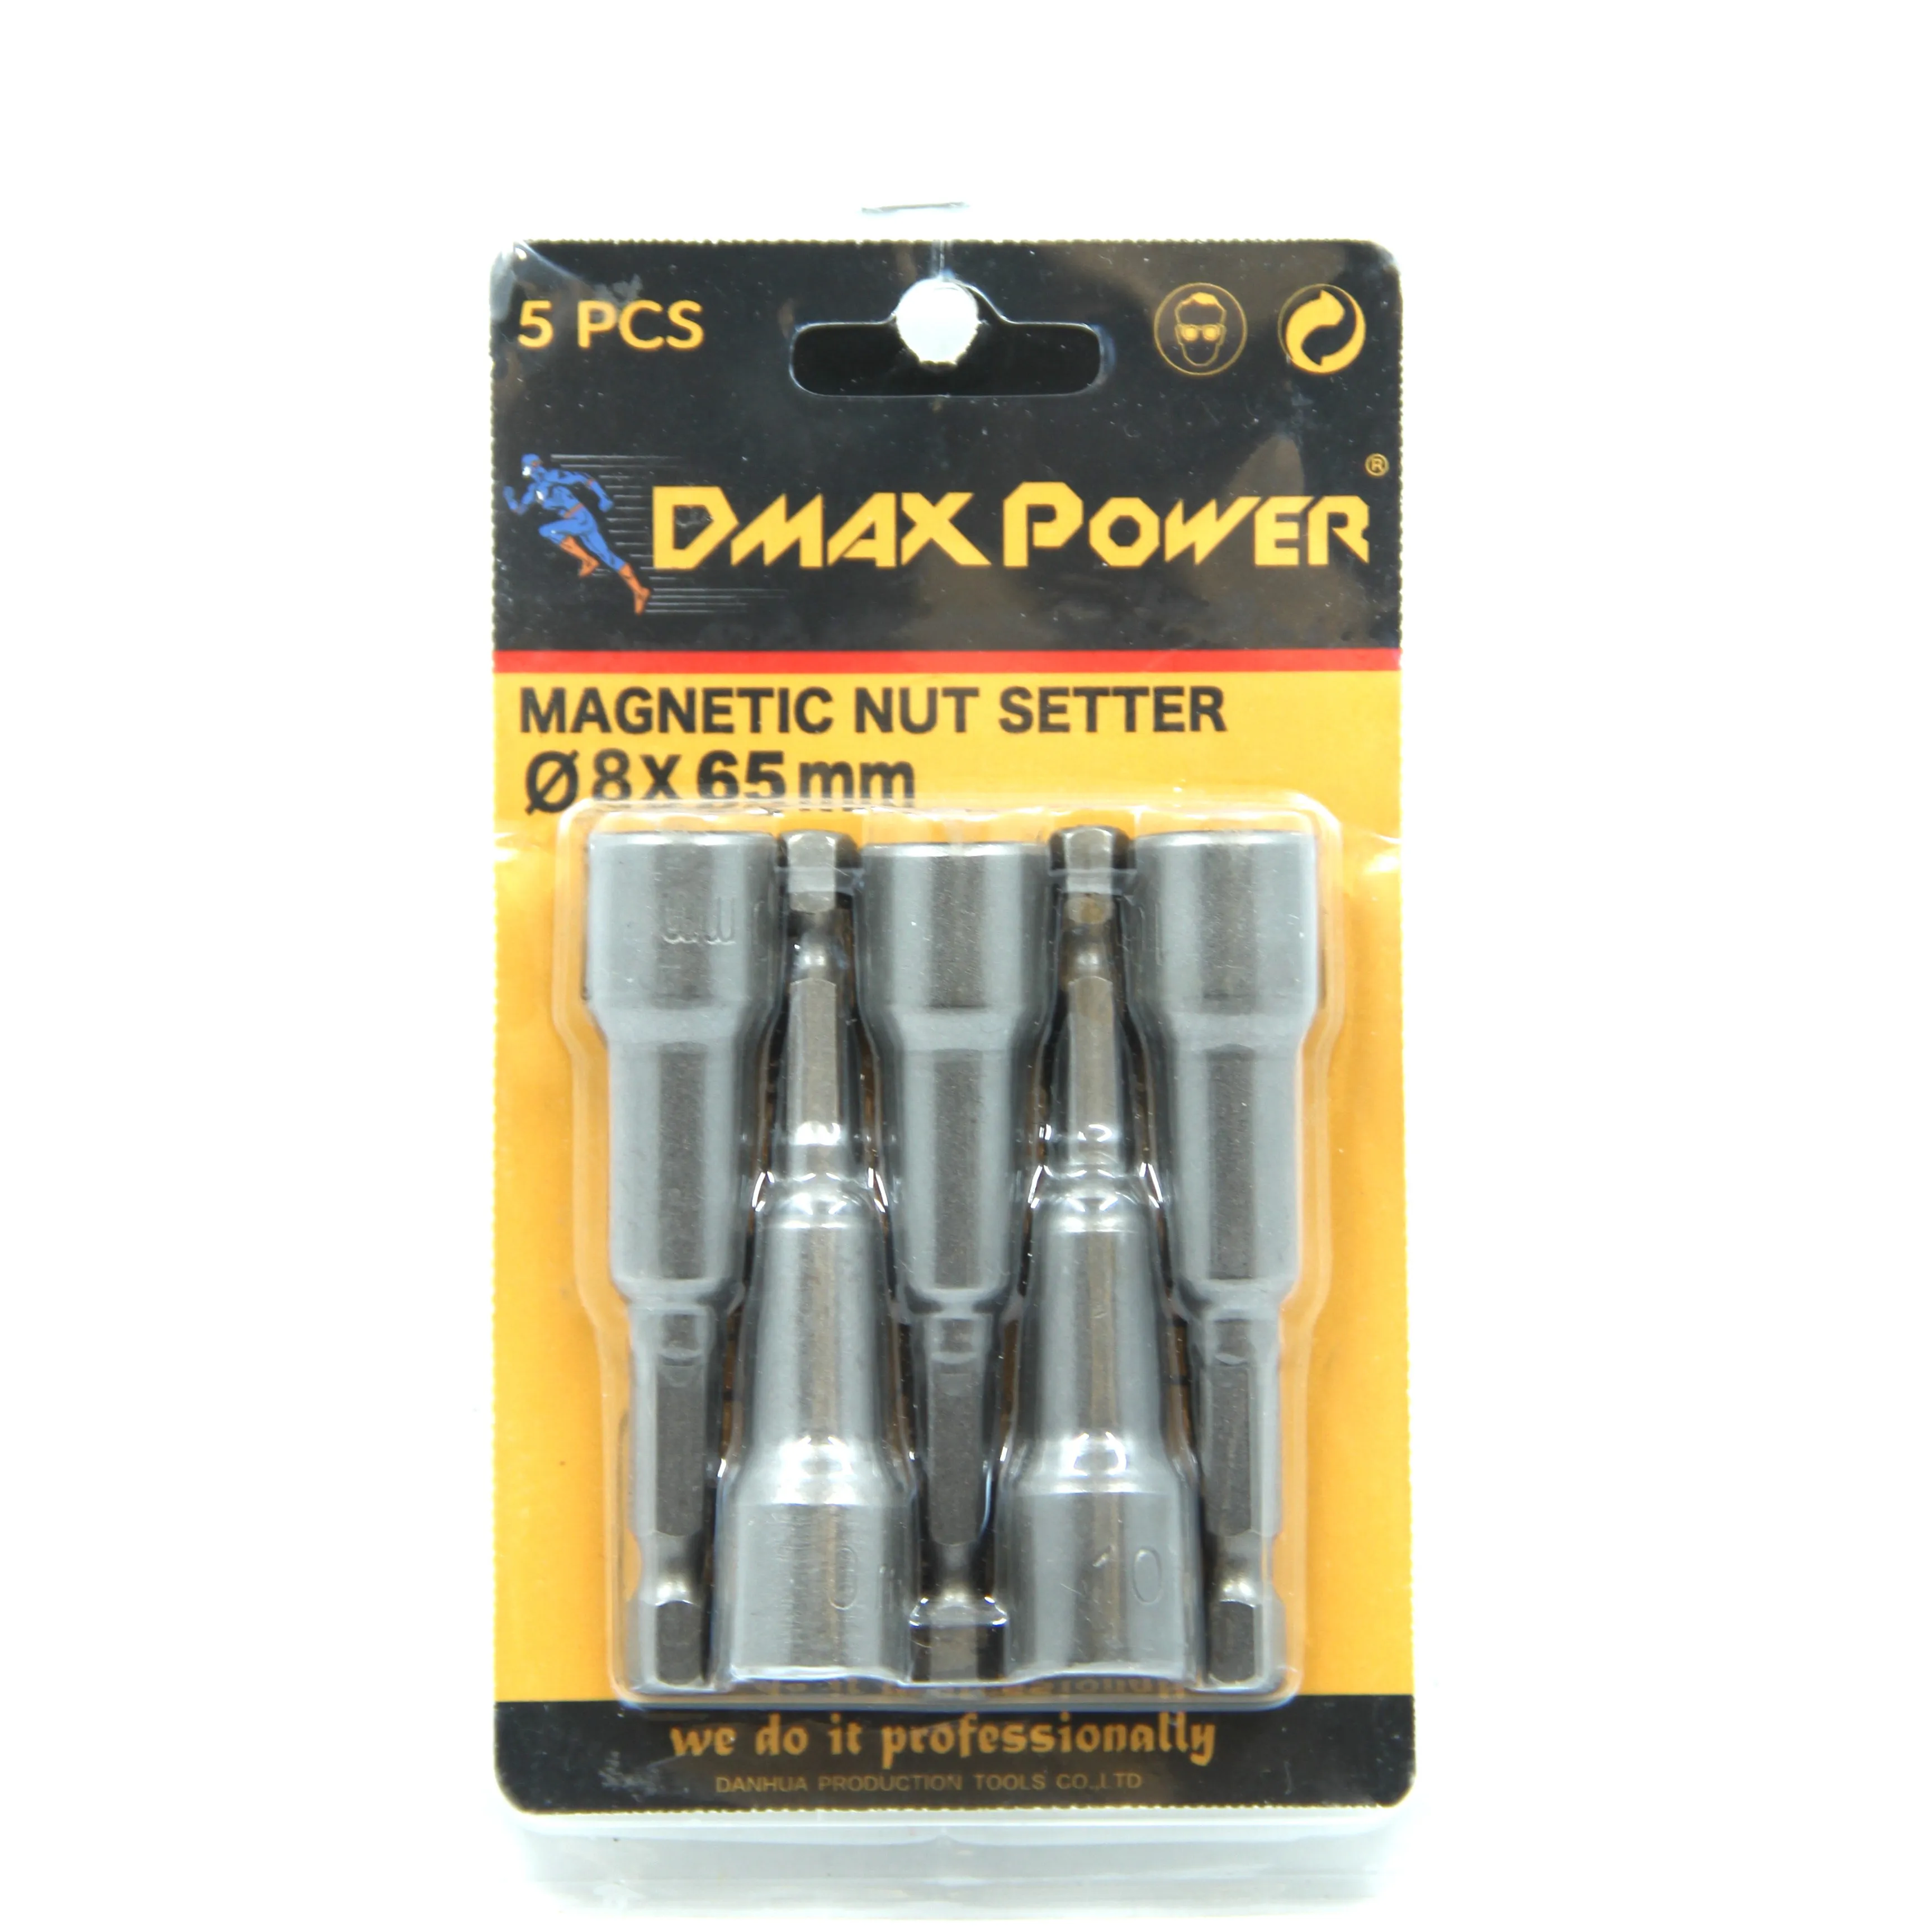 High standard Hard and durable MAGNETIC NUT SET light weight Induction hardened MAGNETIC NUT SET